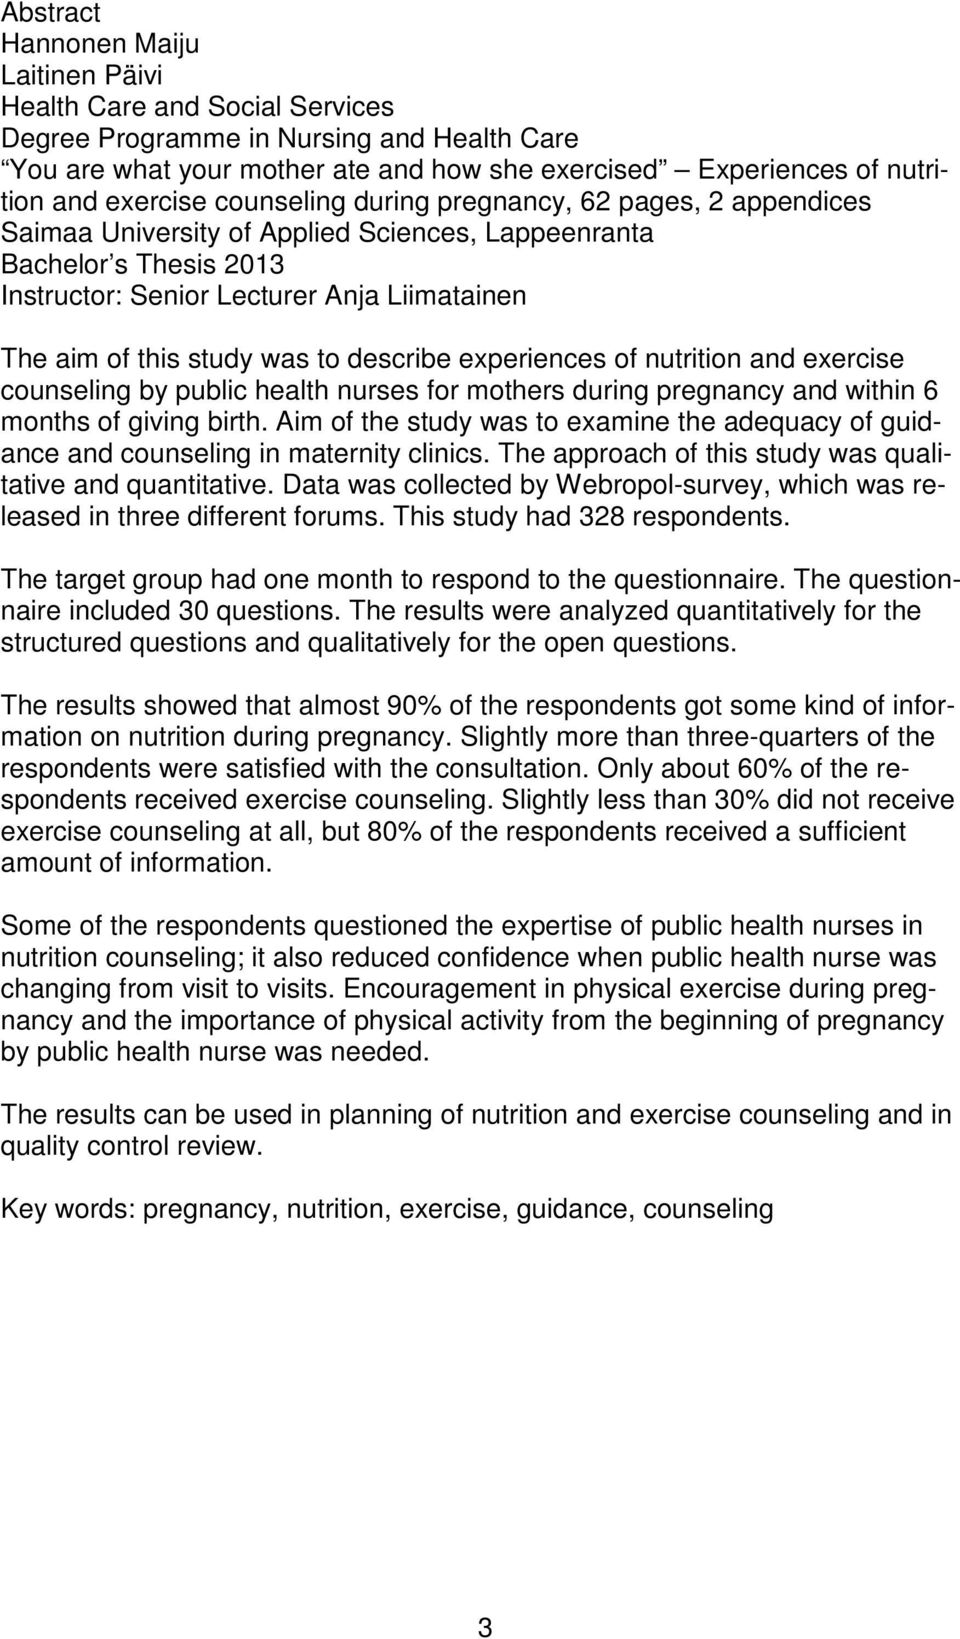 study was to describe experiences of nutrition and exercise counseling by public health nurses for mothers during pregnancy and within 6 months of giving birth.